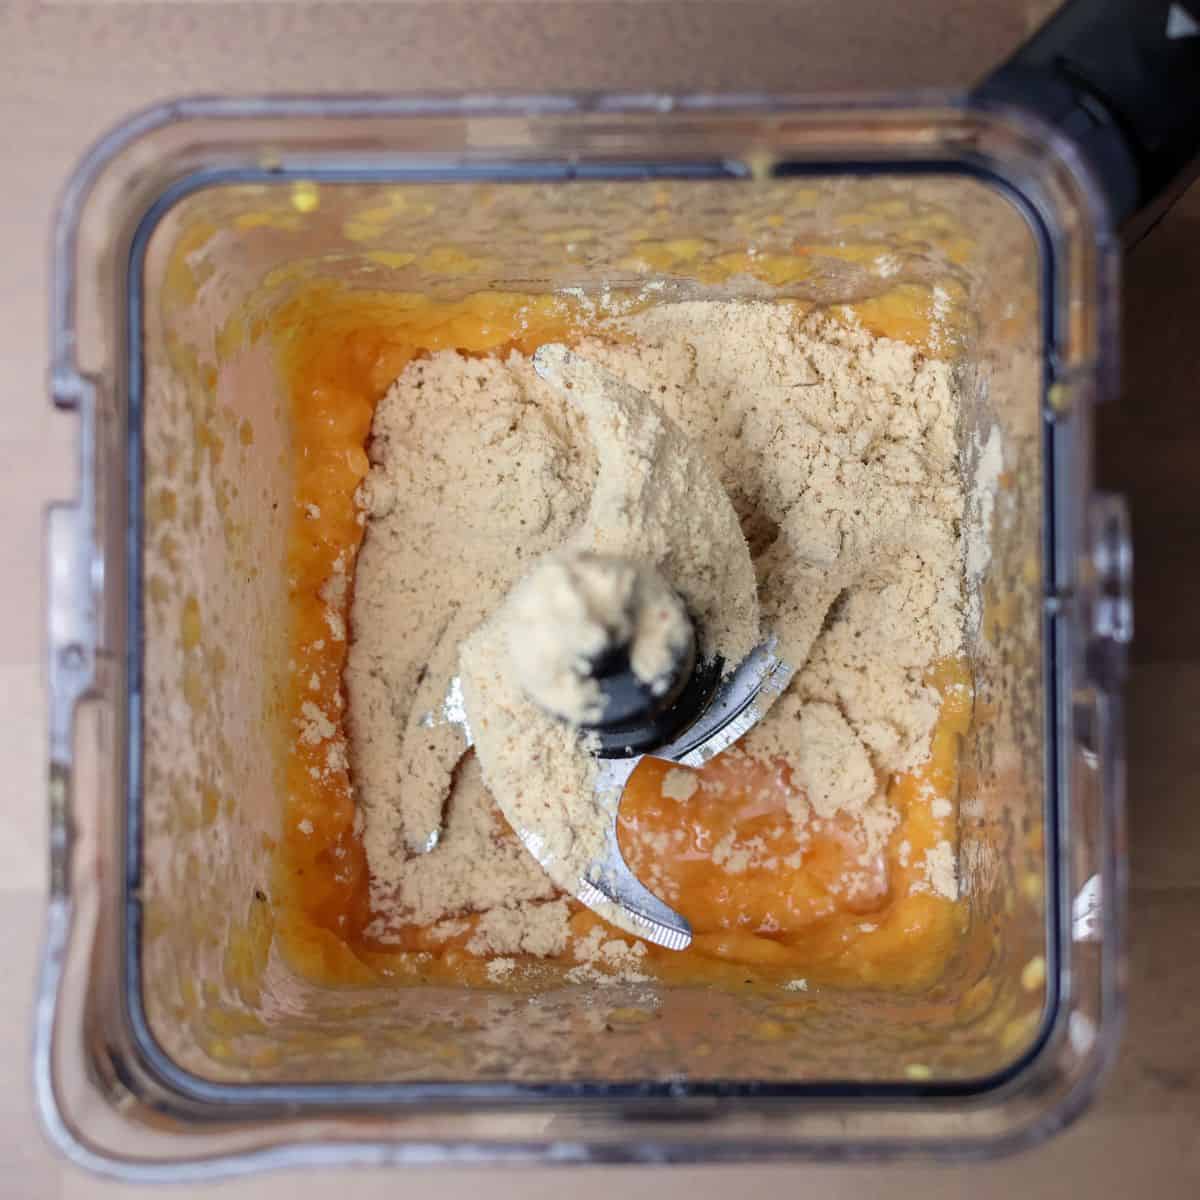 Top-down view of a blender with a layer of vanilla protein powder on top of a base of blended orange fruit mixture.